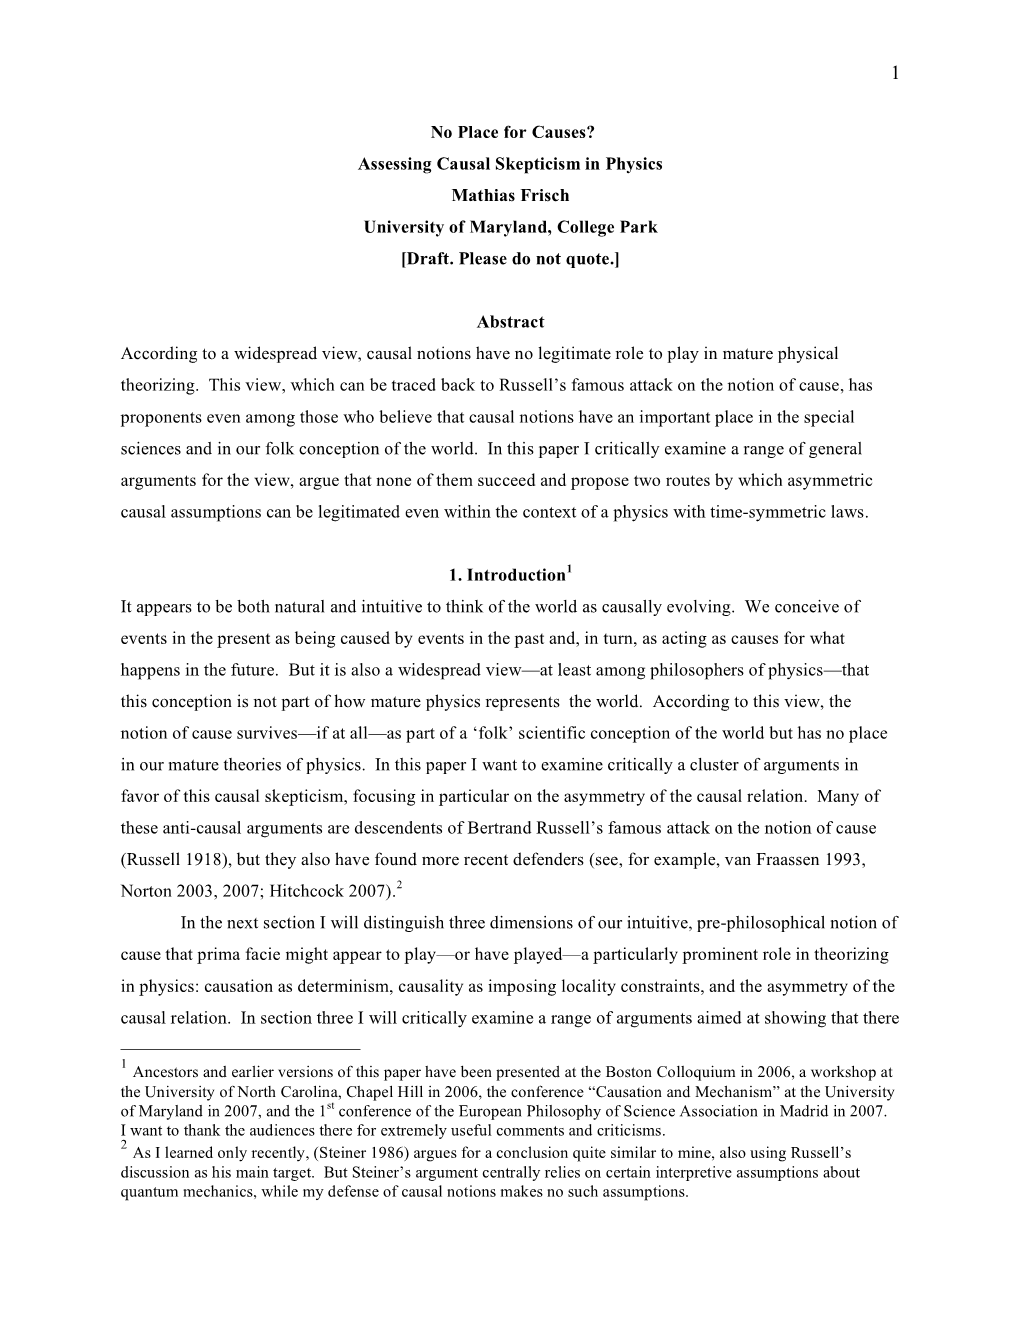 No Place for Causes? Assessing Causal Skepticism in Physics Mathias Frisch University of Maryland, College Park [Draft